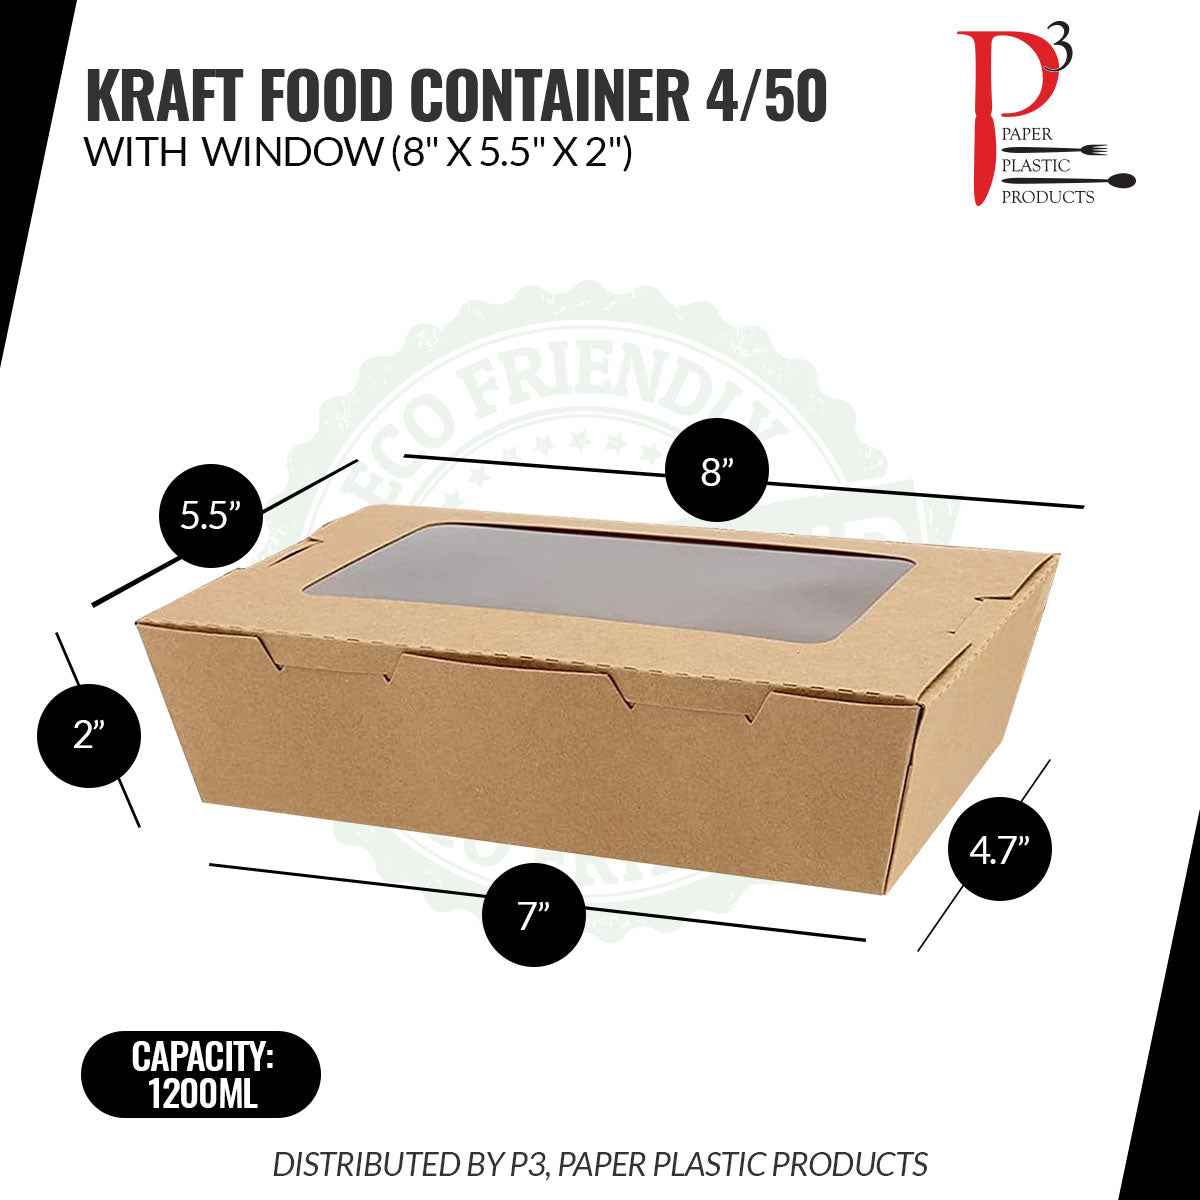 Kraft Food Container with window 8